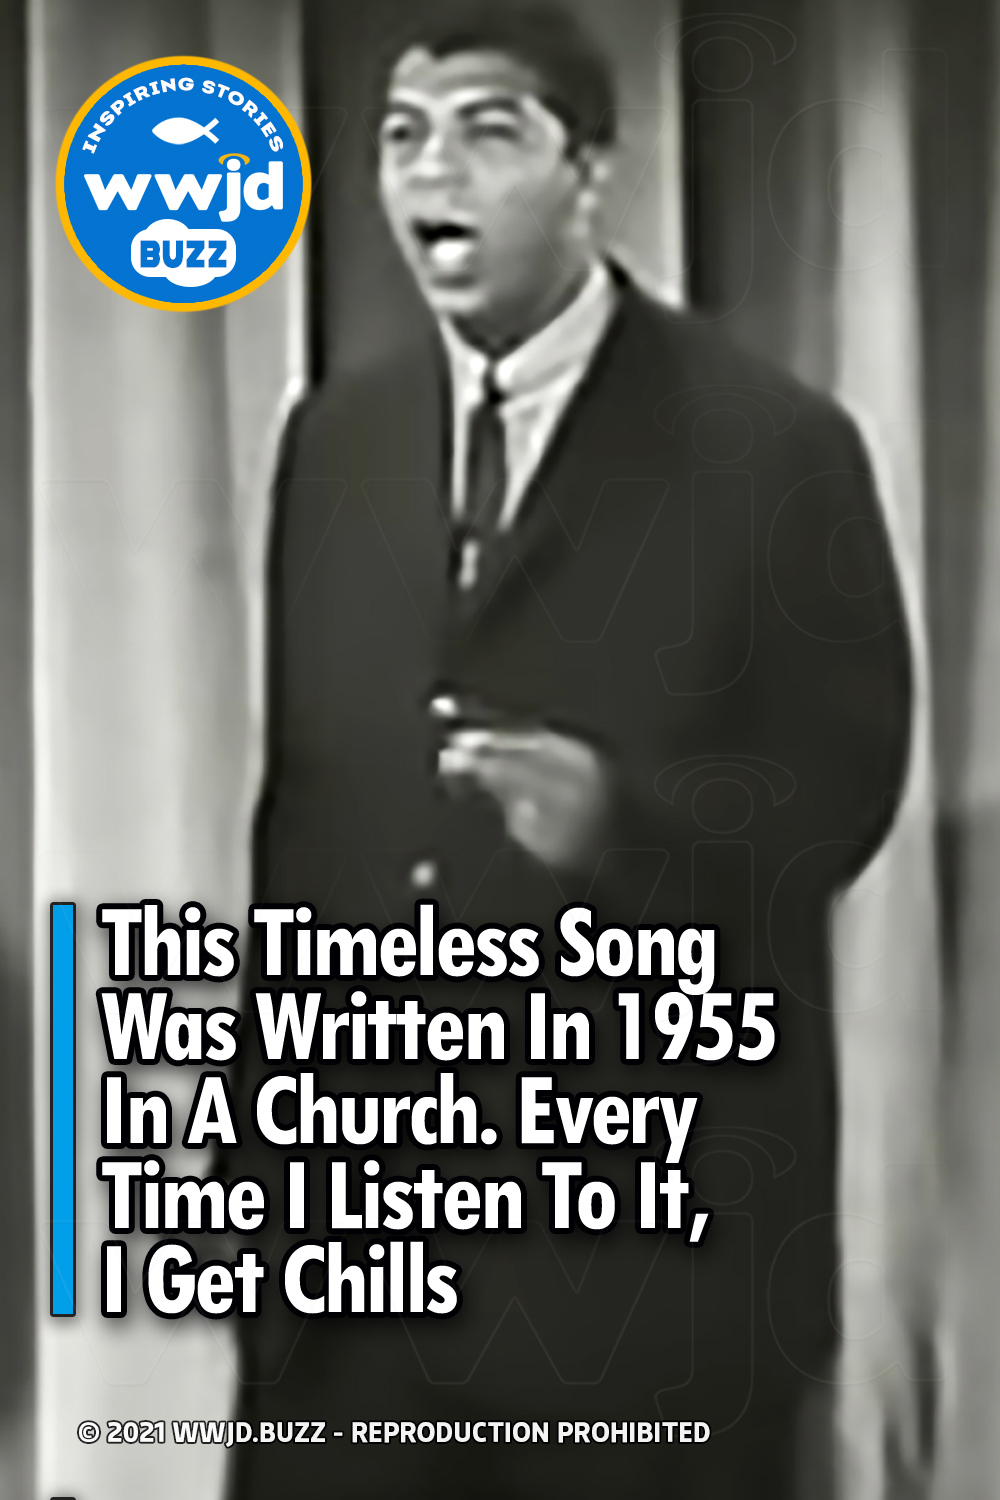 This Timeless Song Was Written In 1955 In A Church. Every Time I Listen To It, I Get Chills